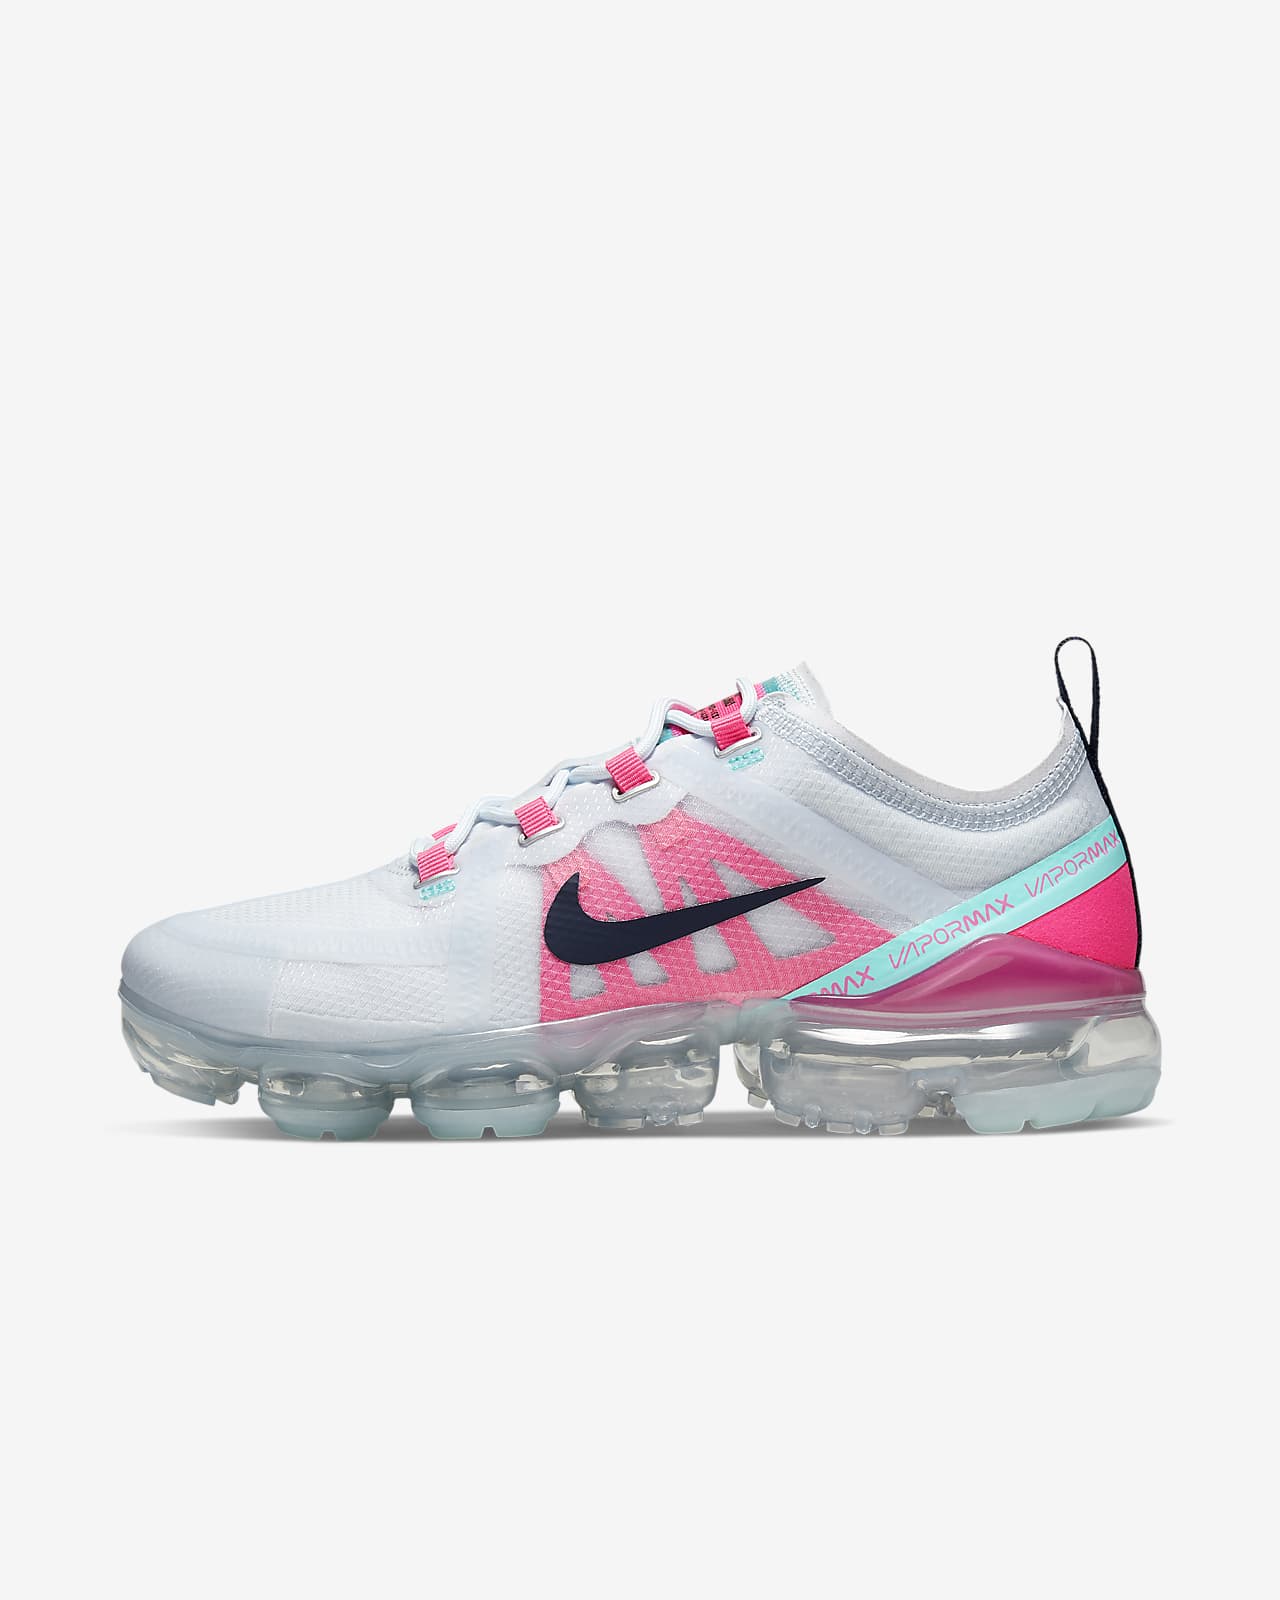 nike for womens shoes 2019